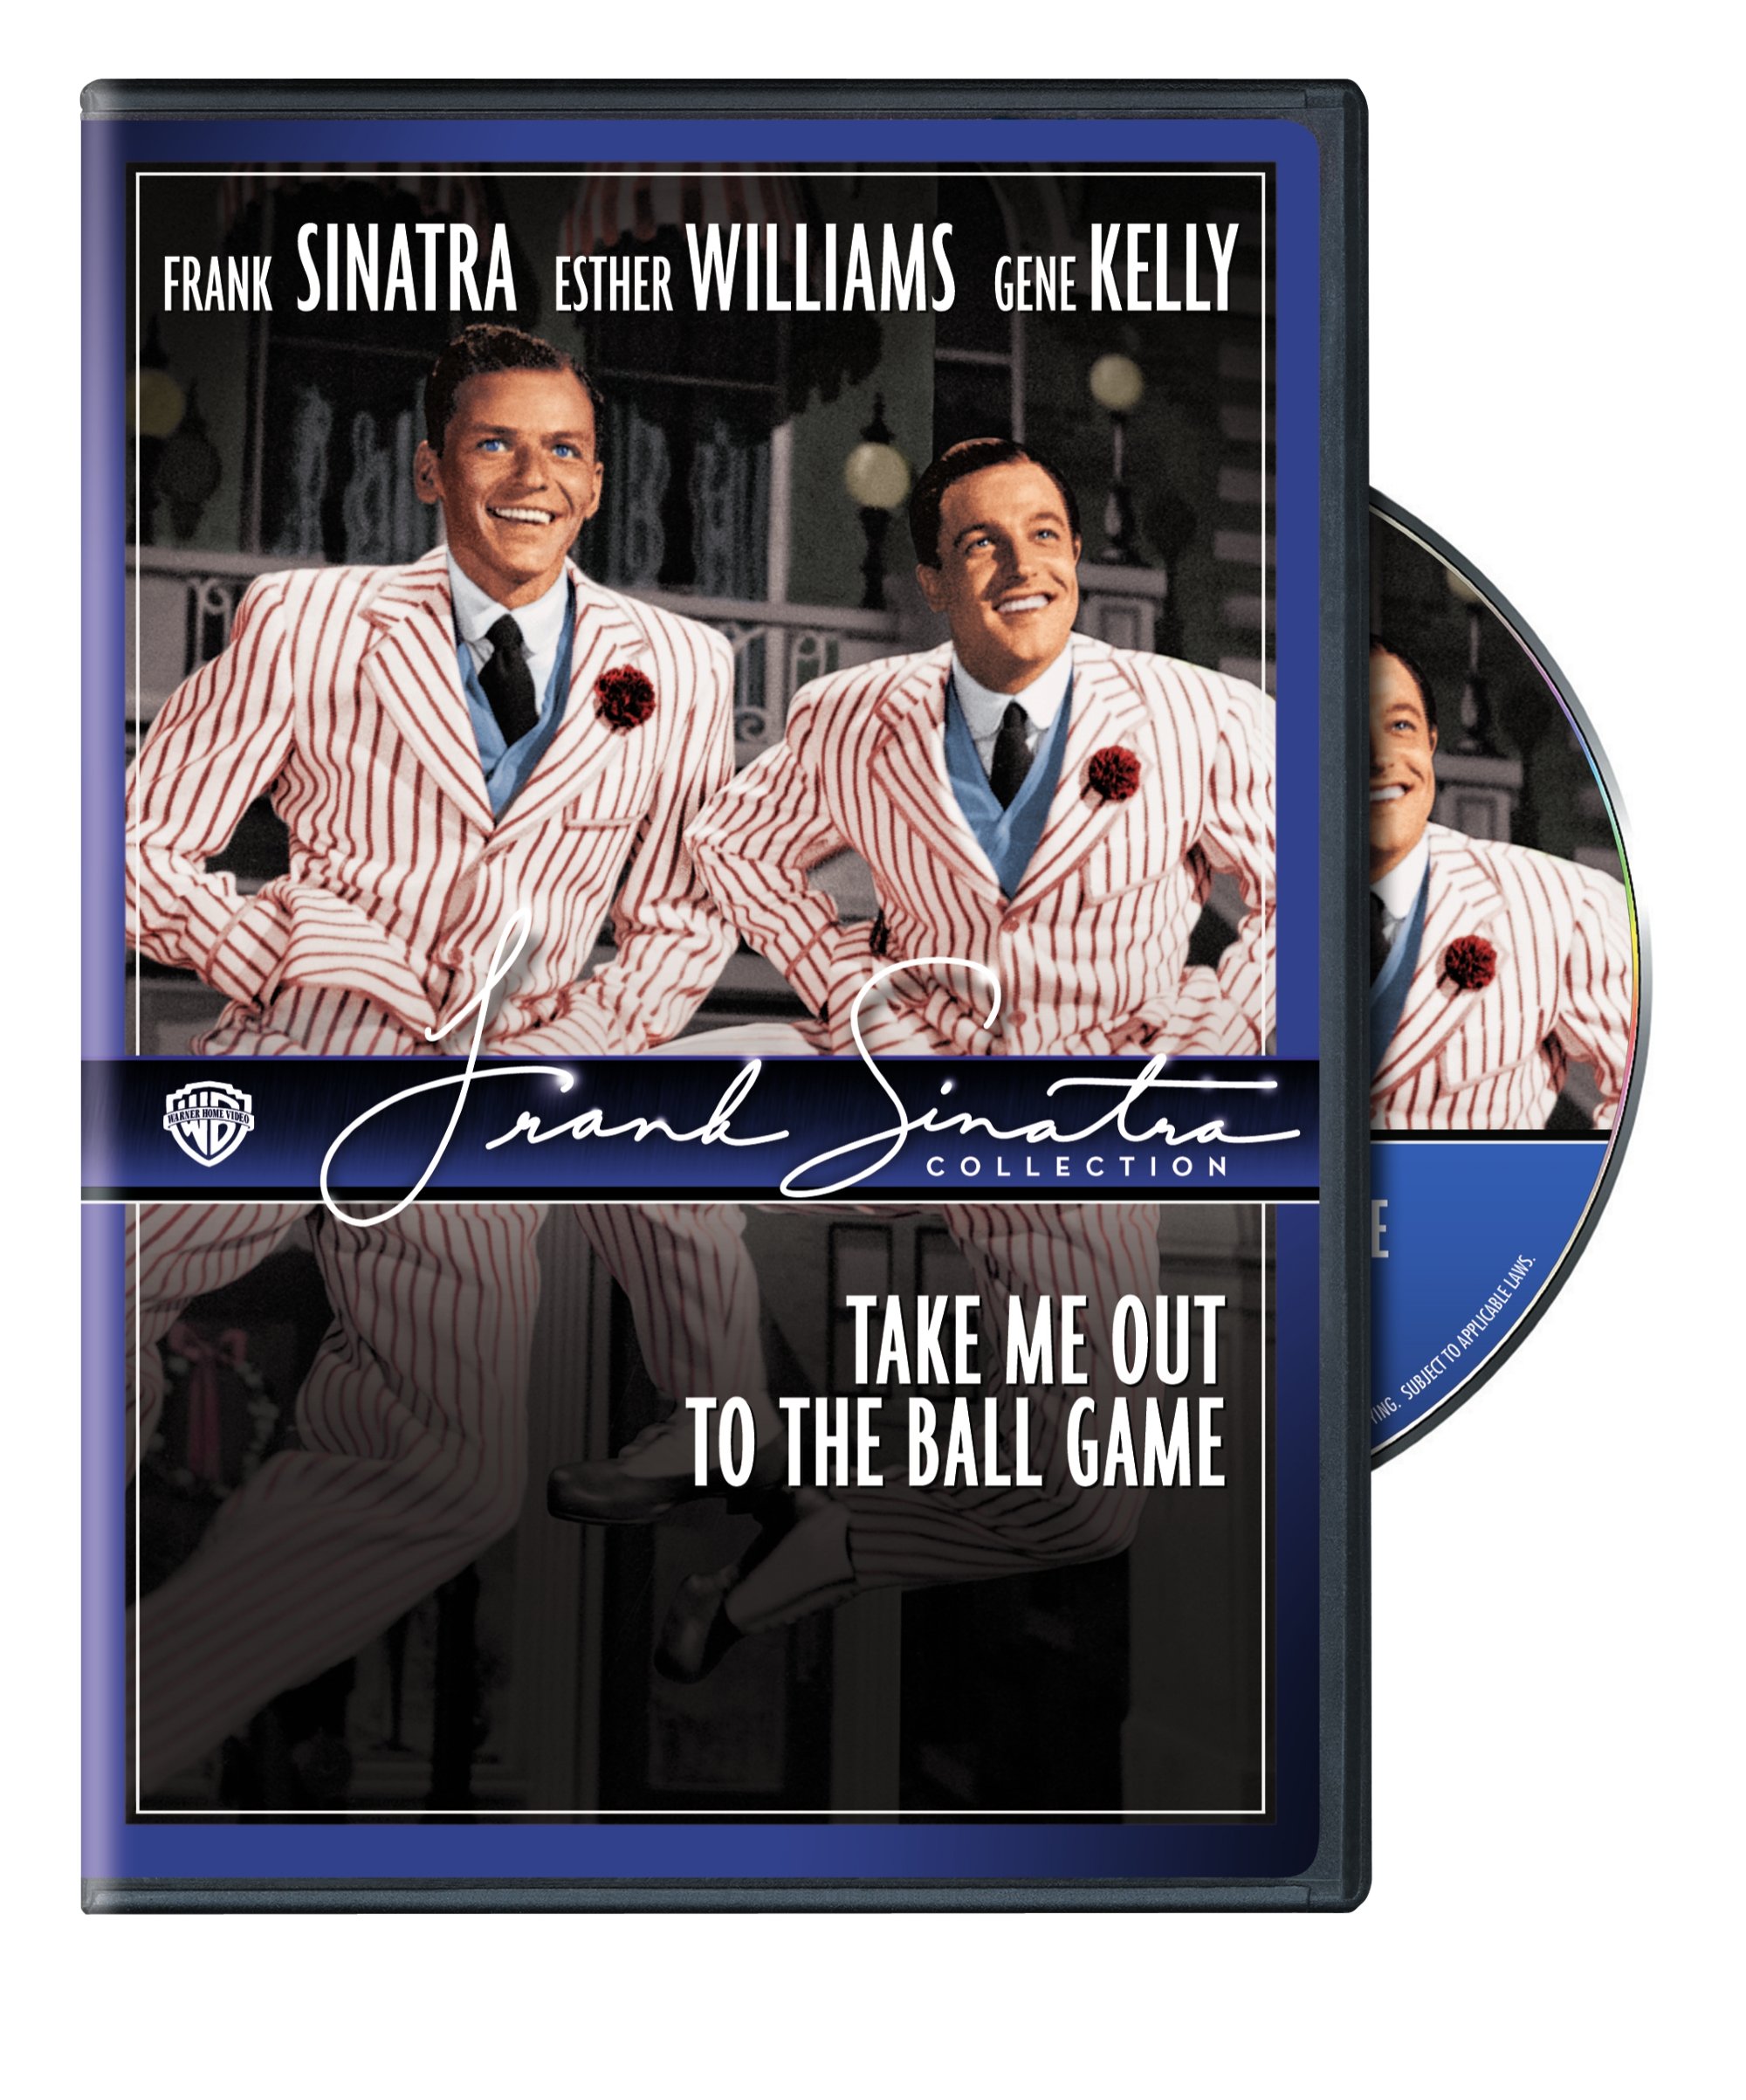 Take Me Out To The Ball Game - DVD [ 1949 ]  - Musical Movies On DVD - Movies On GRUV